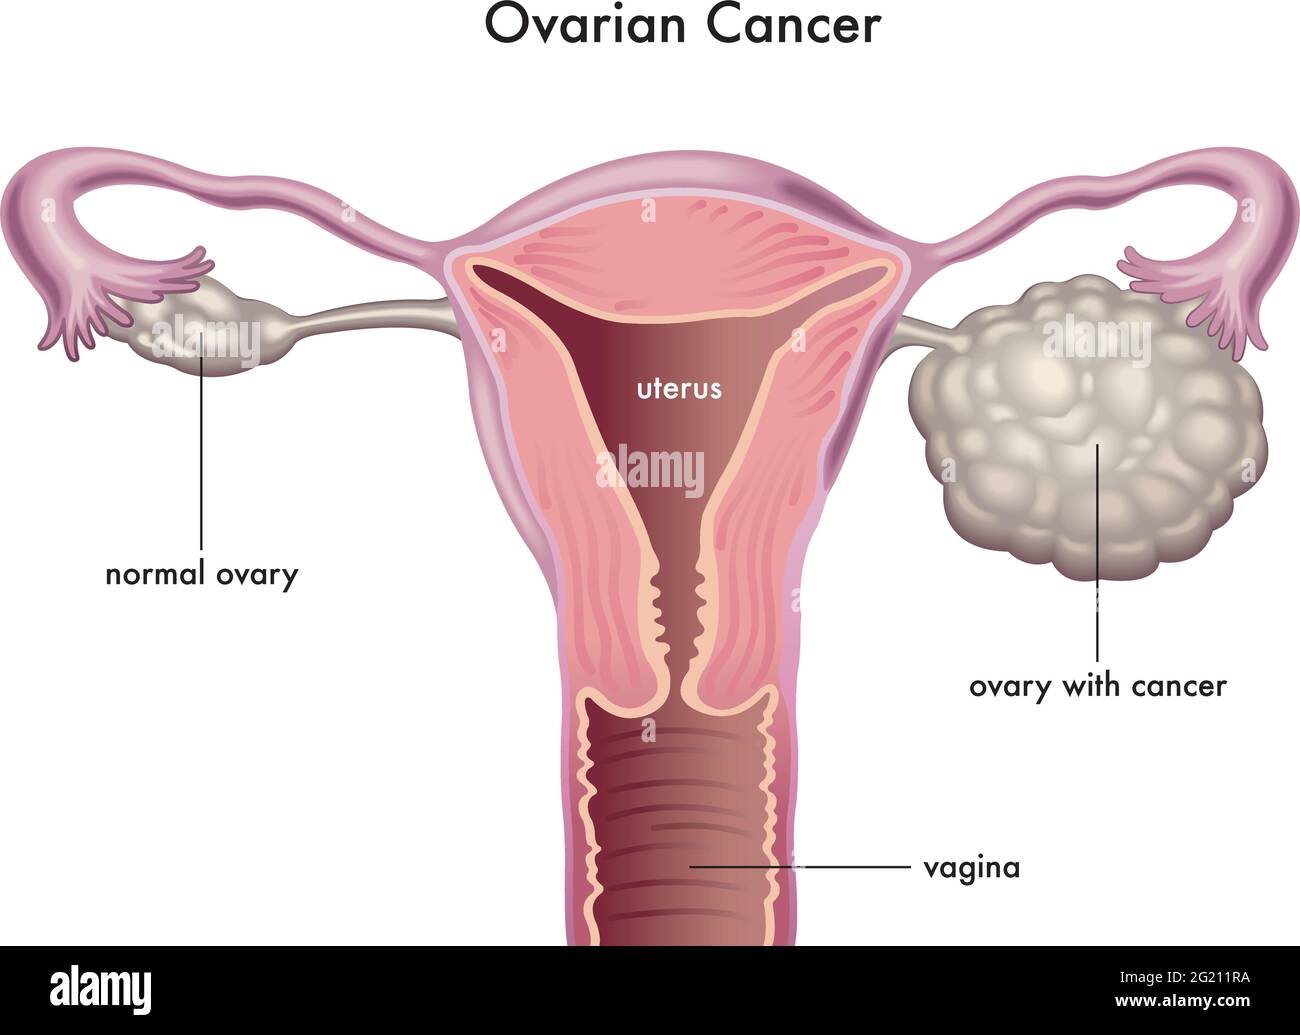 Medical illustration of the symptoms of ovarian cancer. Stock Vector